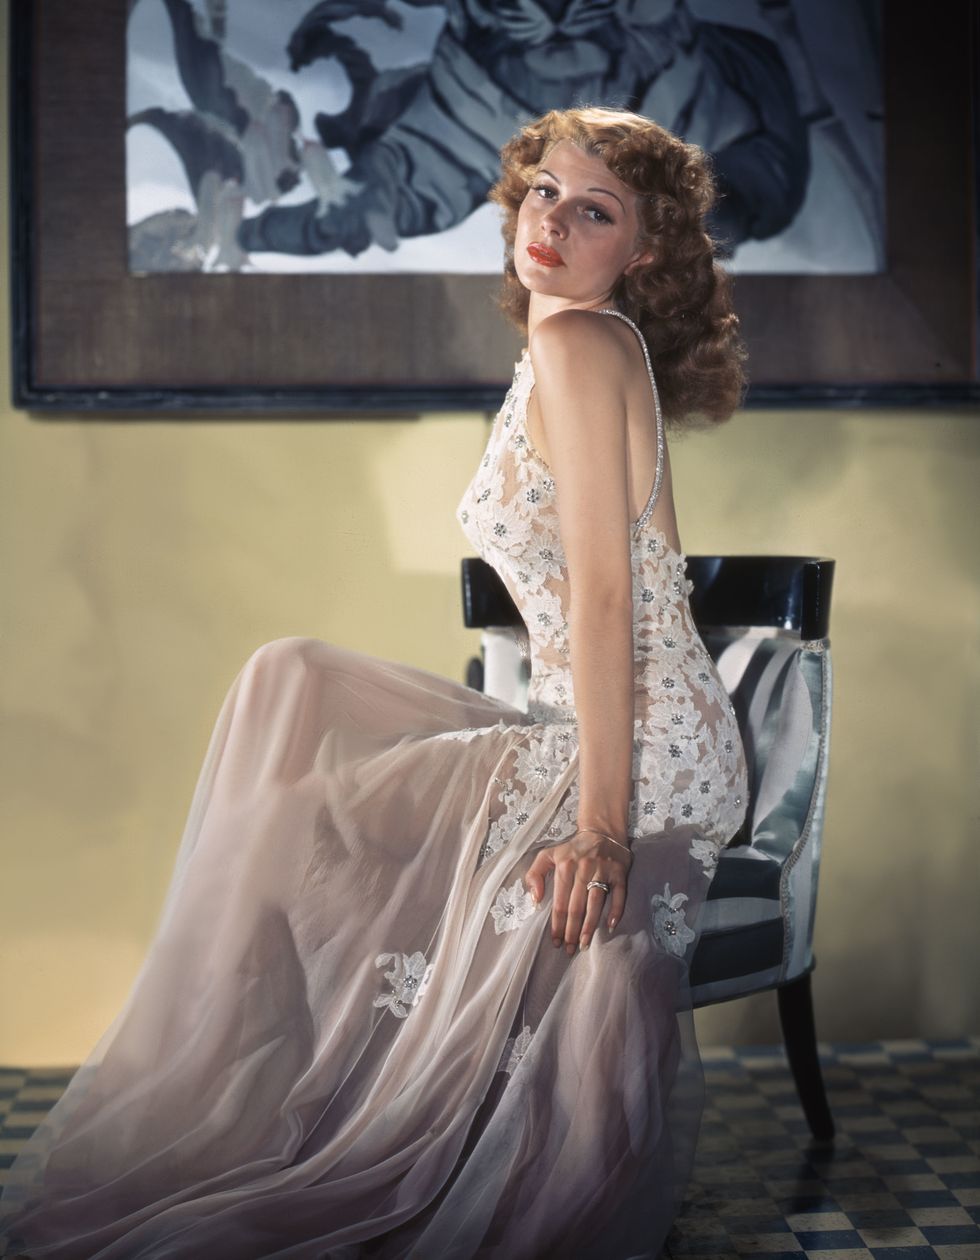 rita hayworth sits in a chair and looks over her shoulder at the camera, she wears a blush floor length dress with flower appliques